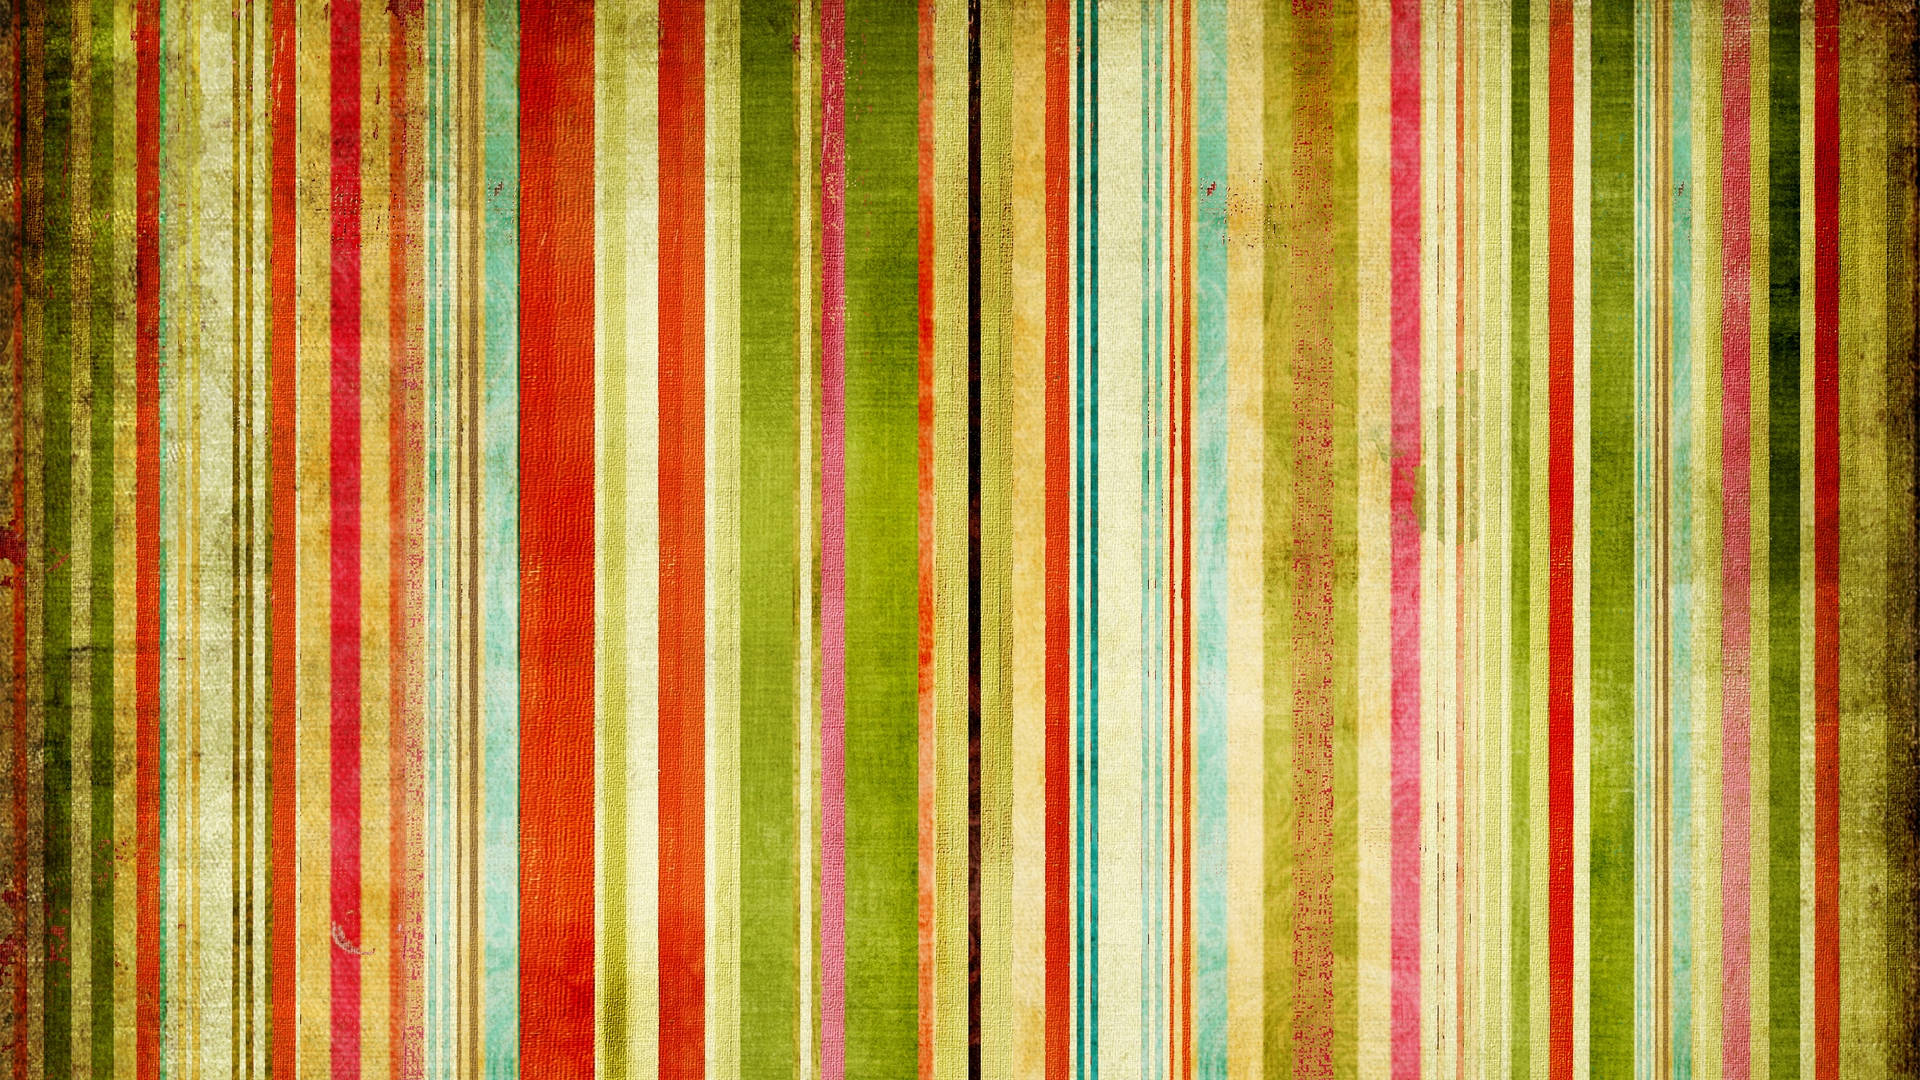 Colorful Vertical Stripes Grunge Texture Wallpaper